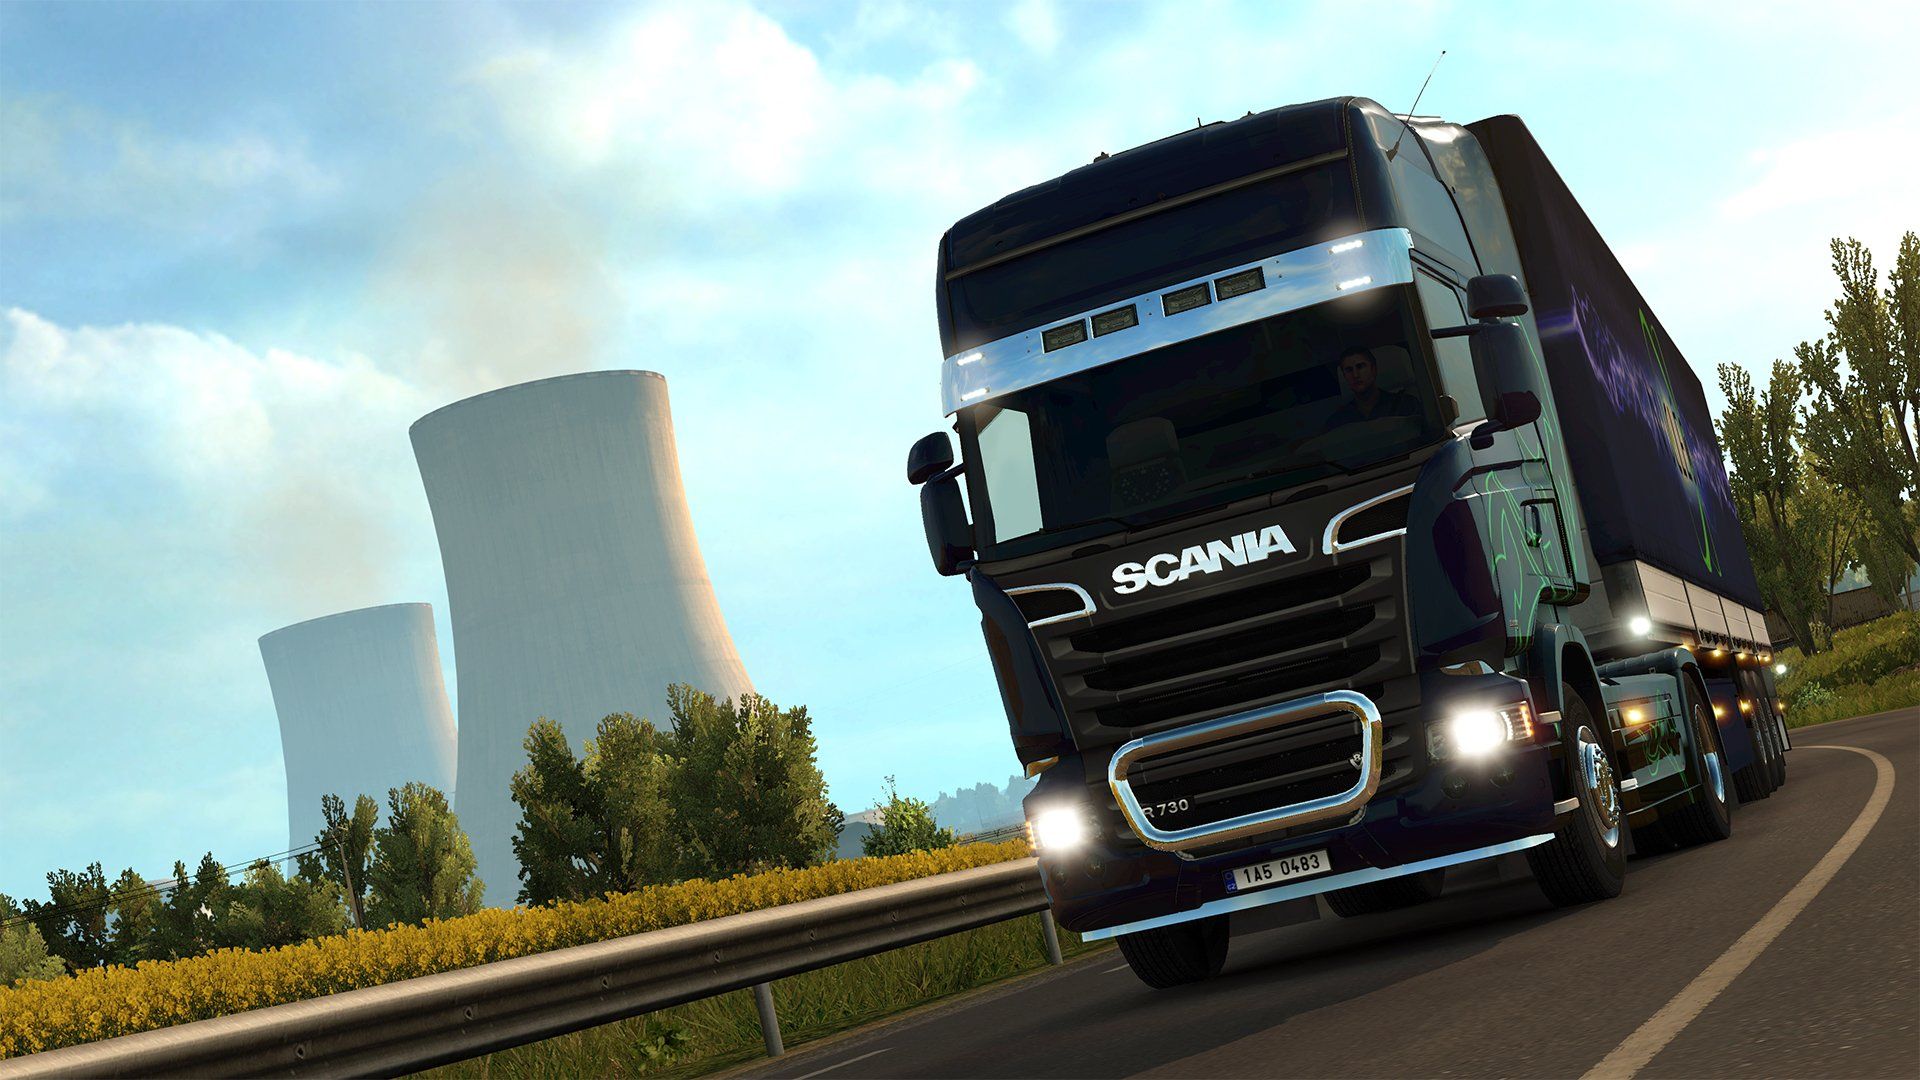 Euro Truck Simulator 2 Common Technical Issues And Truck